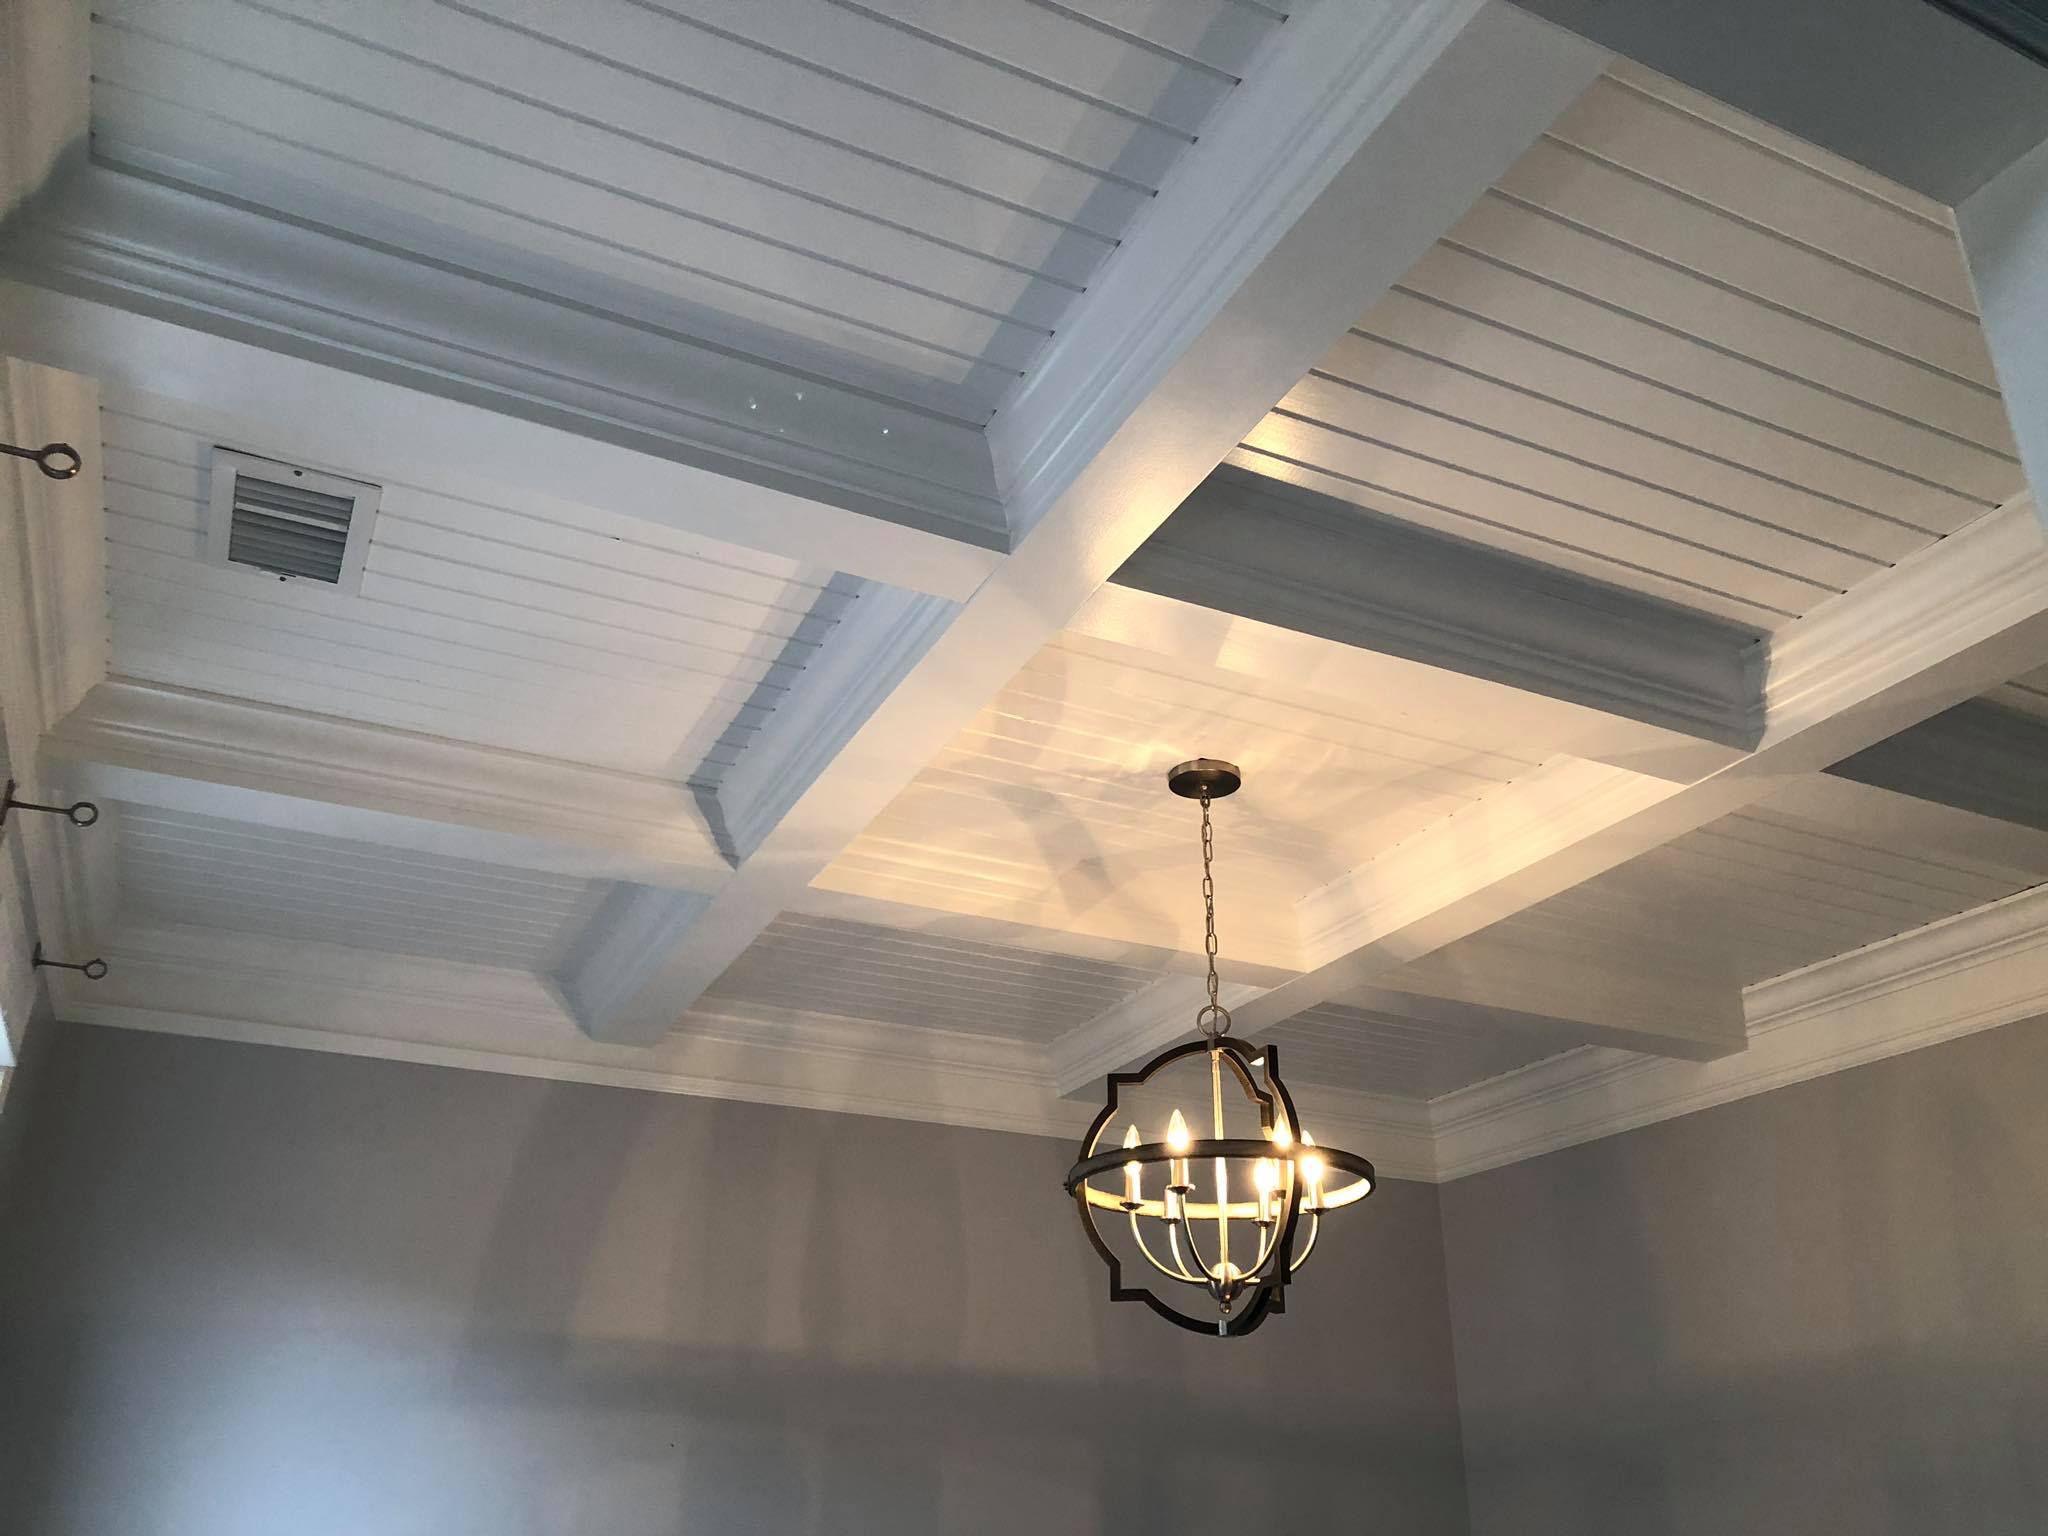 Custom Ceiling with Beams and Shiplap Paneling Painted White 4